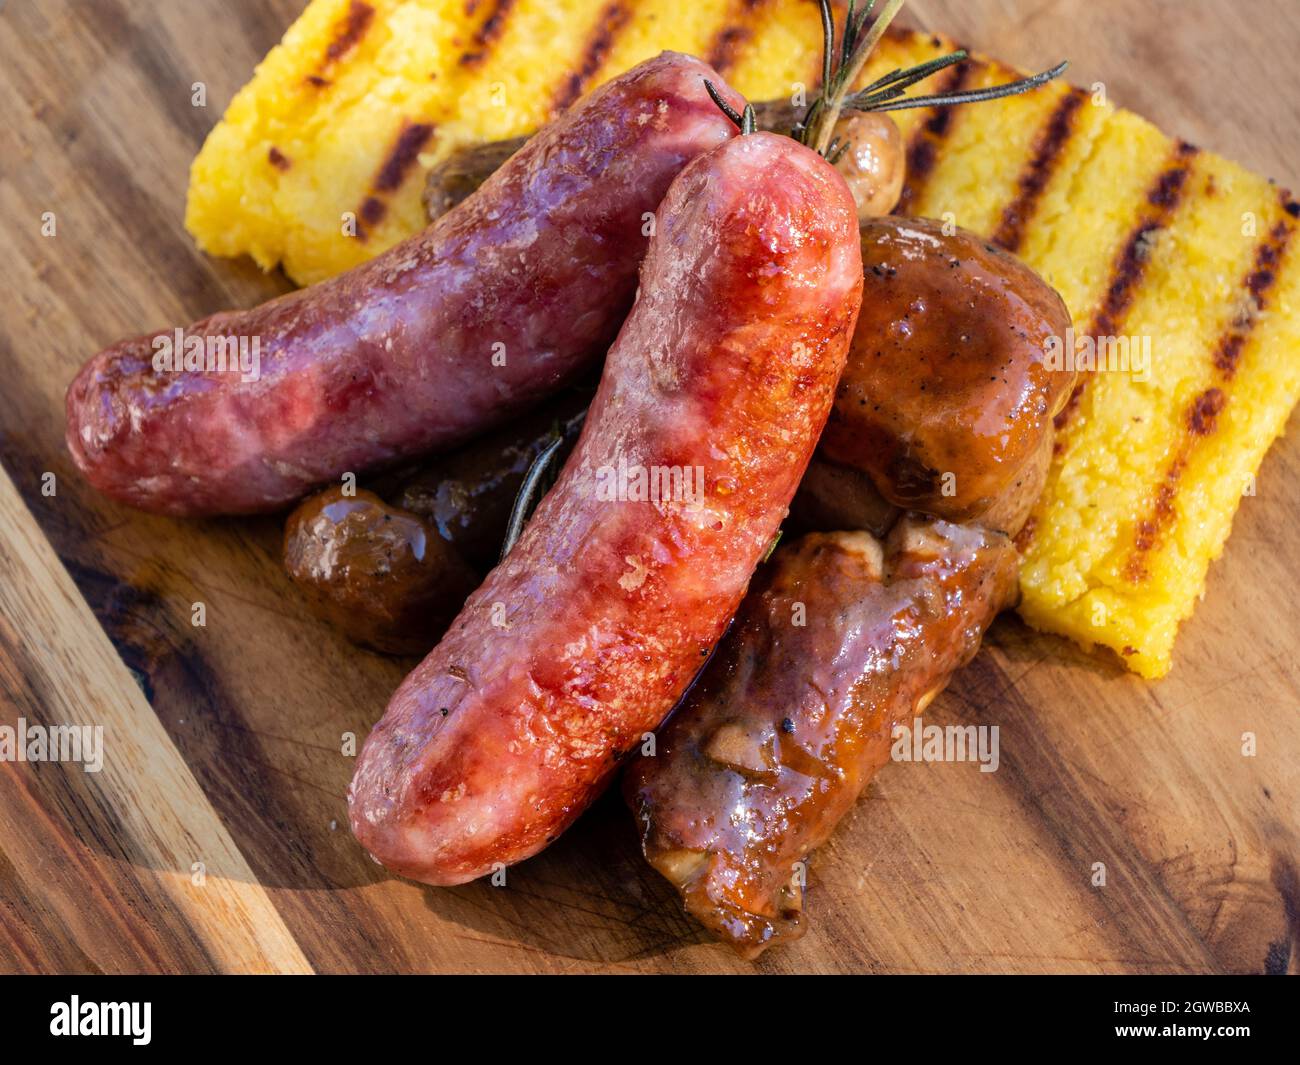 Salsiccia Italian Sausage with Sauteed Funghi Porcini or Cep Mushrooms and Grilled Polenta Close Up Detail Stock Photo